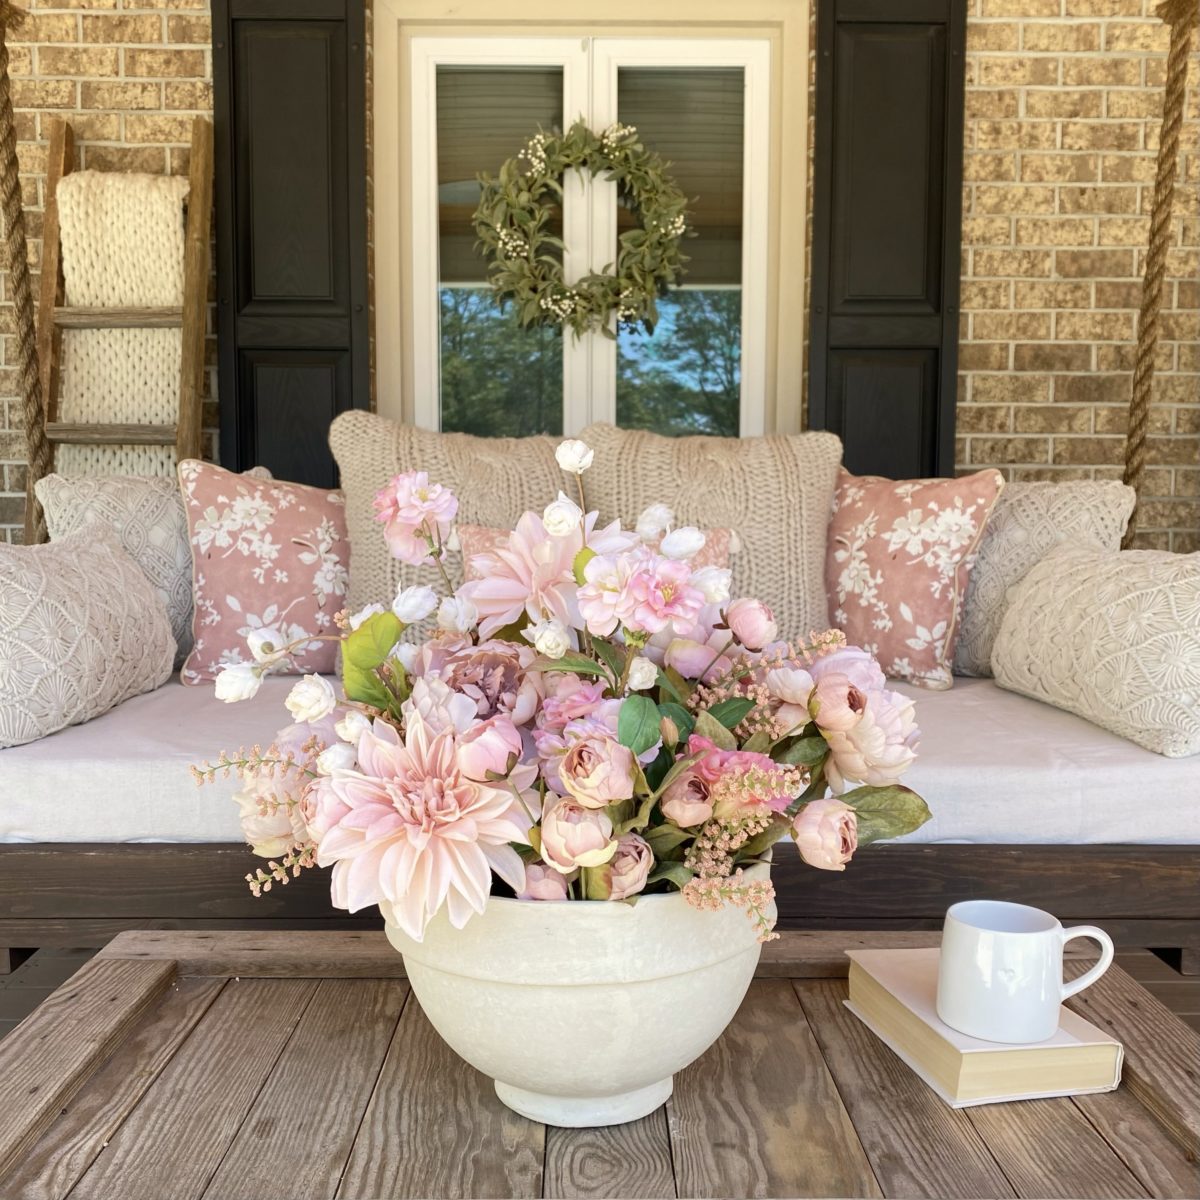 Front view of the porch swing on the front porch with a pink floral arrangement on the coffee table in the foreground.